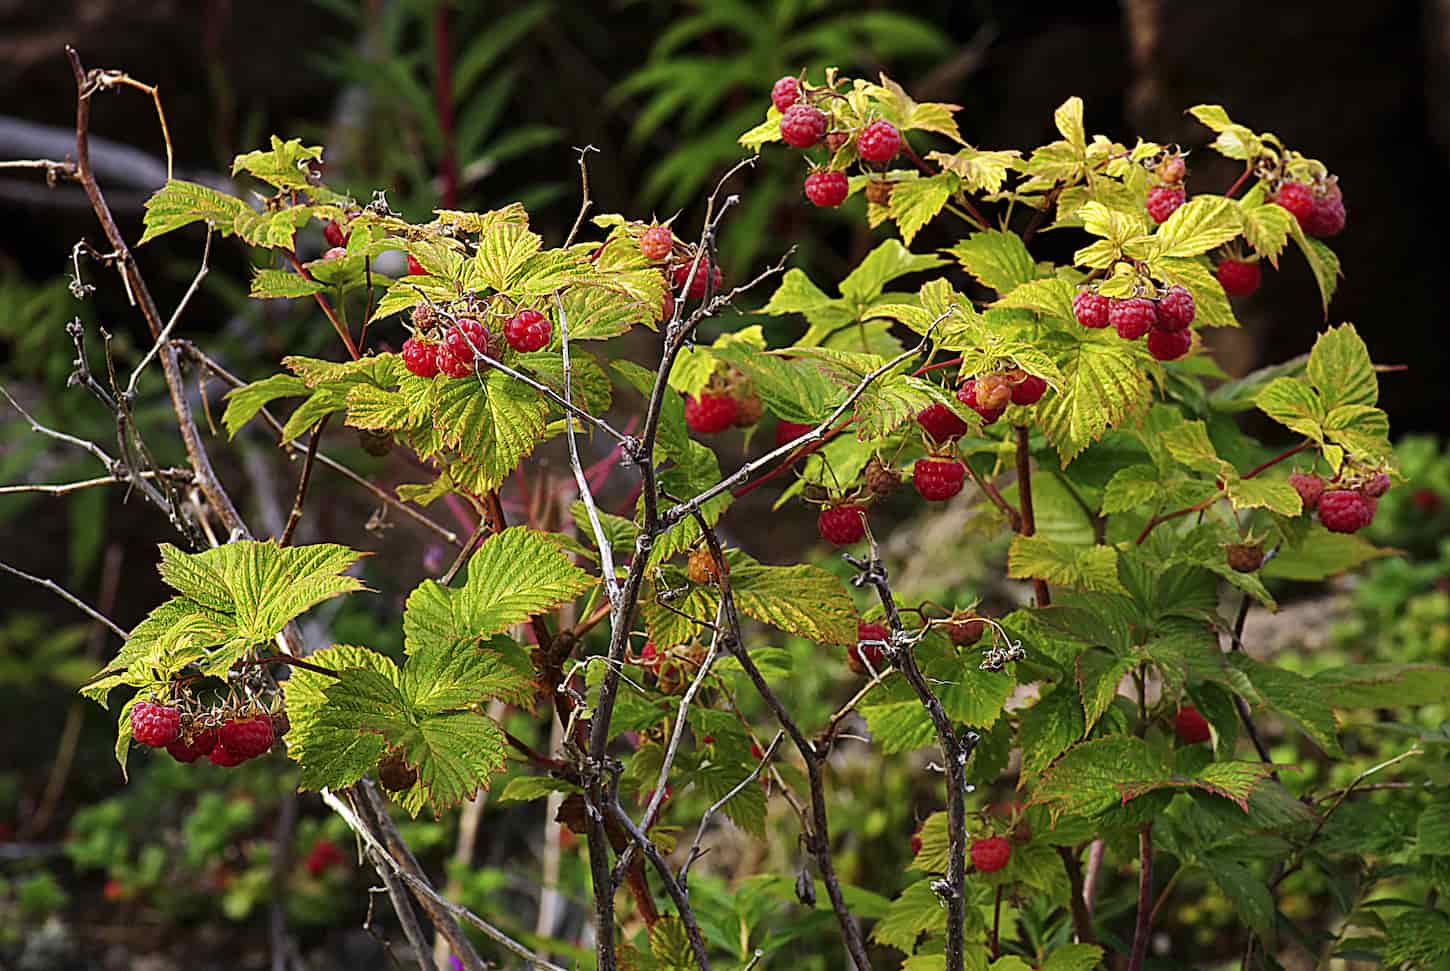 An image of a raspberry bush with bright ripe berries.